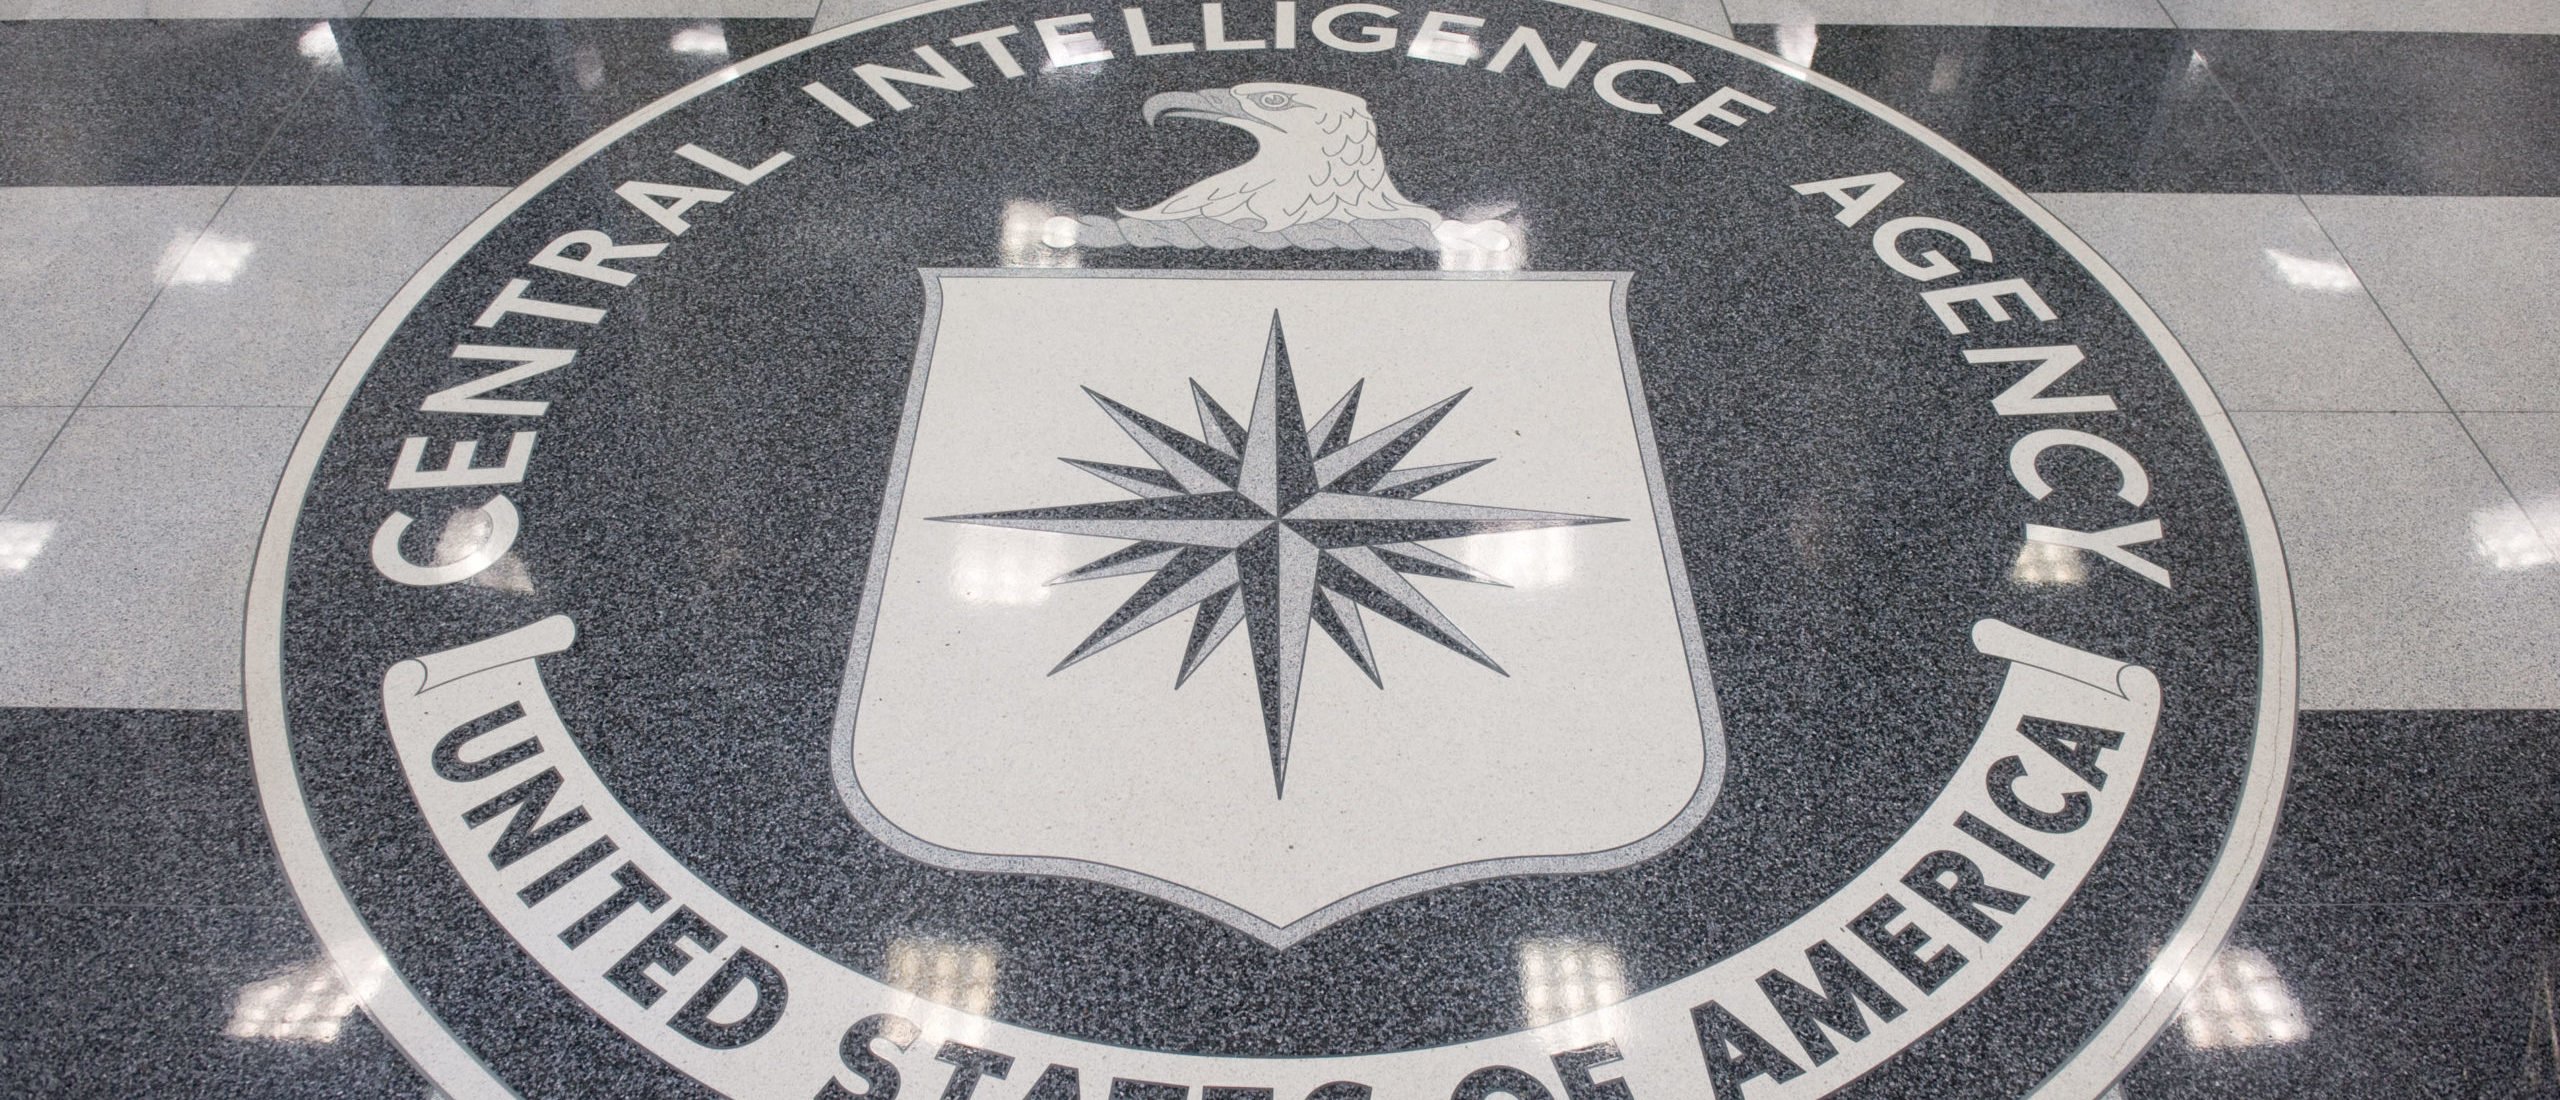 EXCLUSIVE: Meet The Senior CIA Official Caught Posting Pro-Palestinian Content On Social Media | The Daily Caller